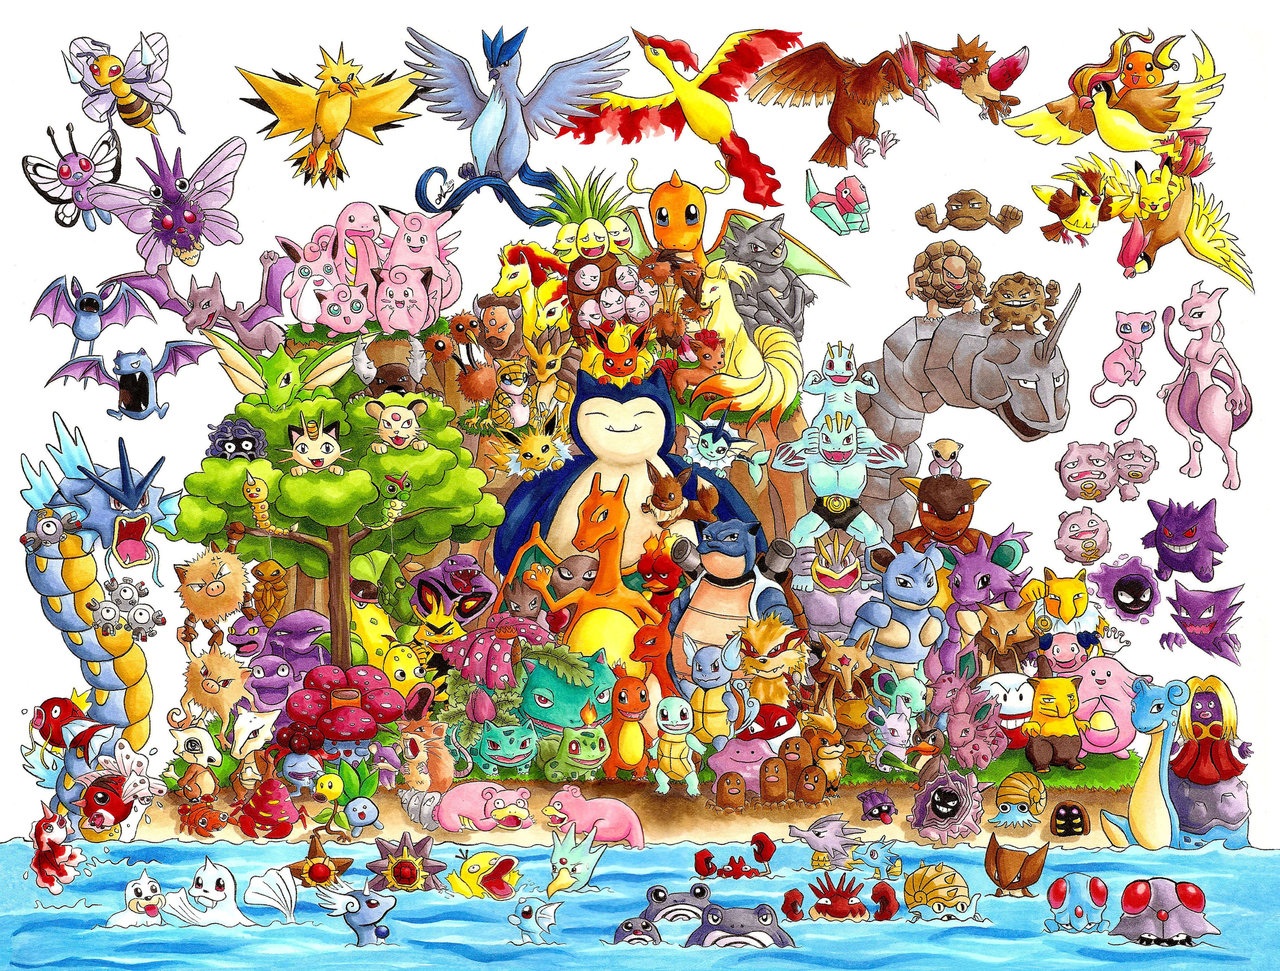 excarabu: Kanto pokedex completed! Look at how bouncy they are